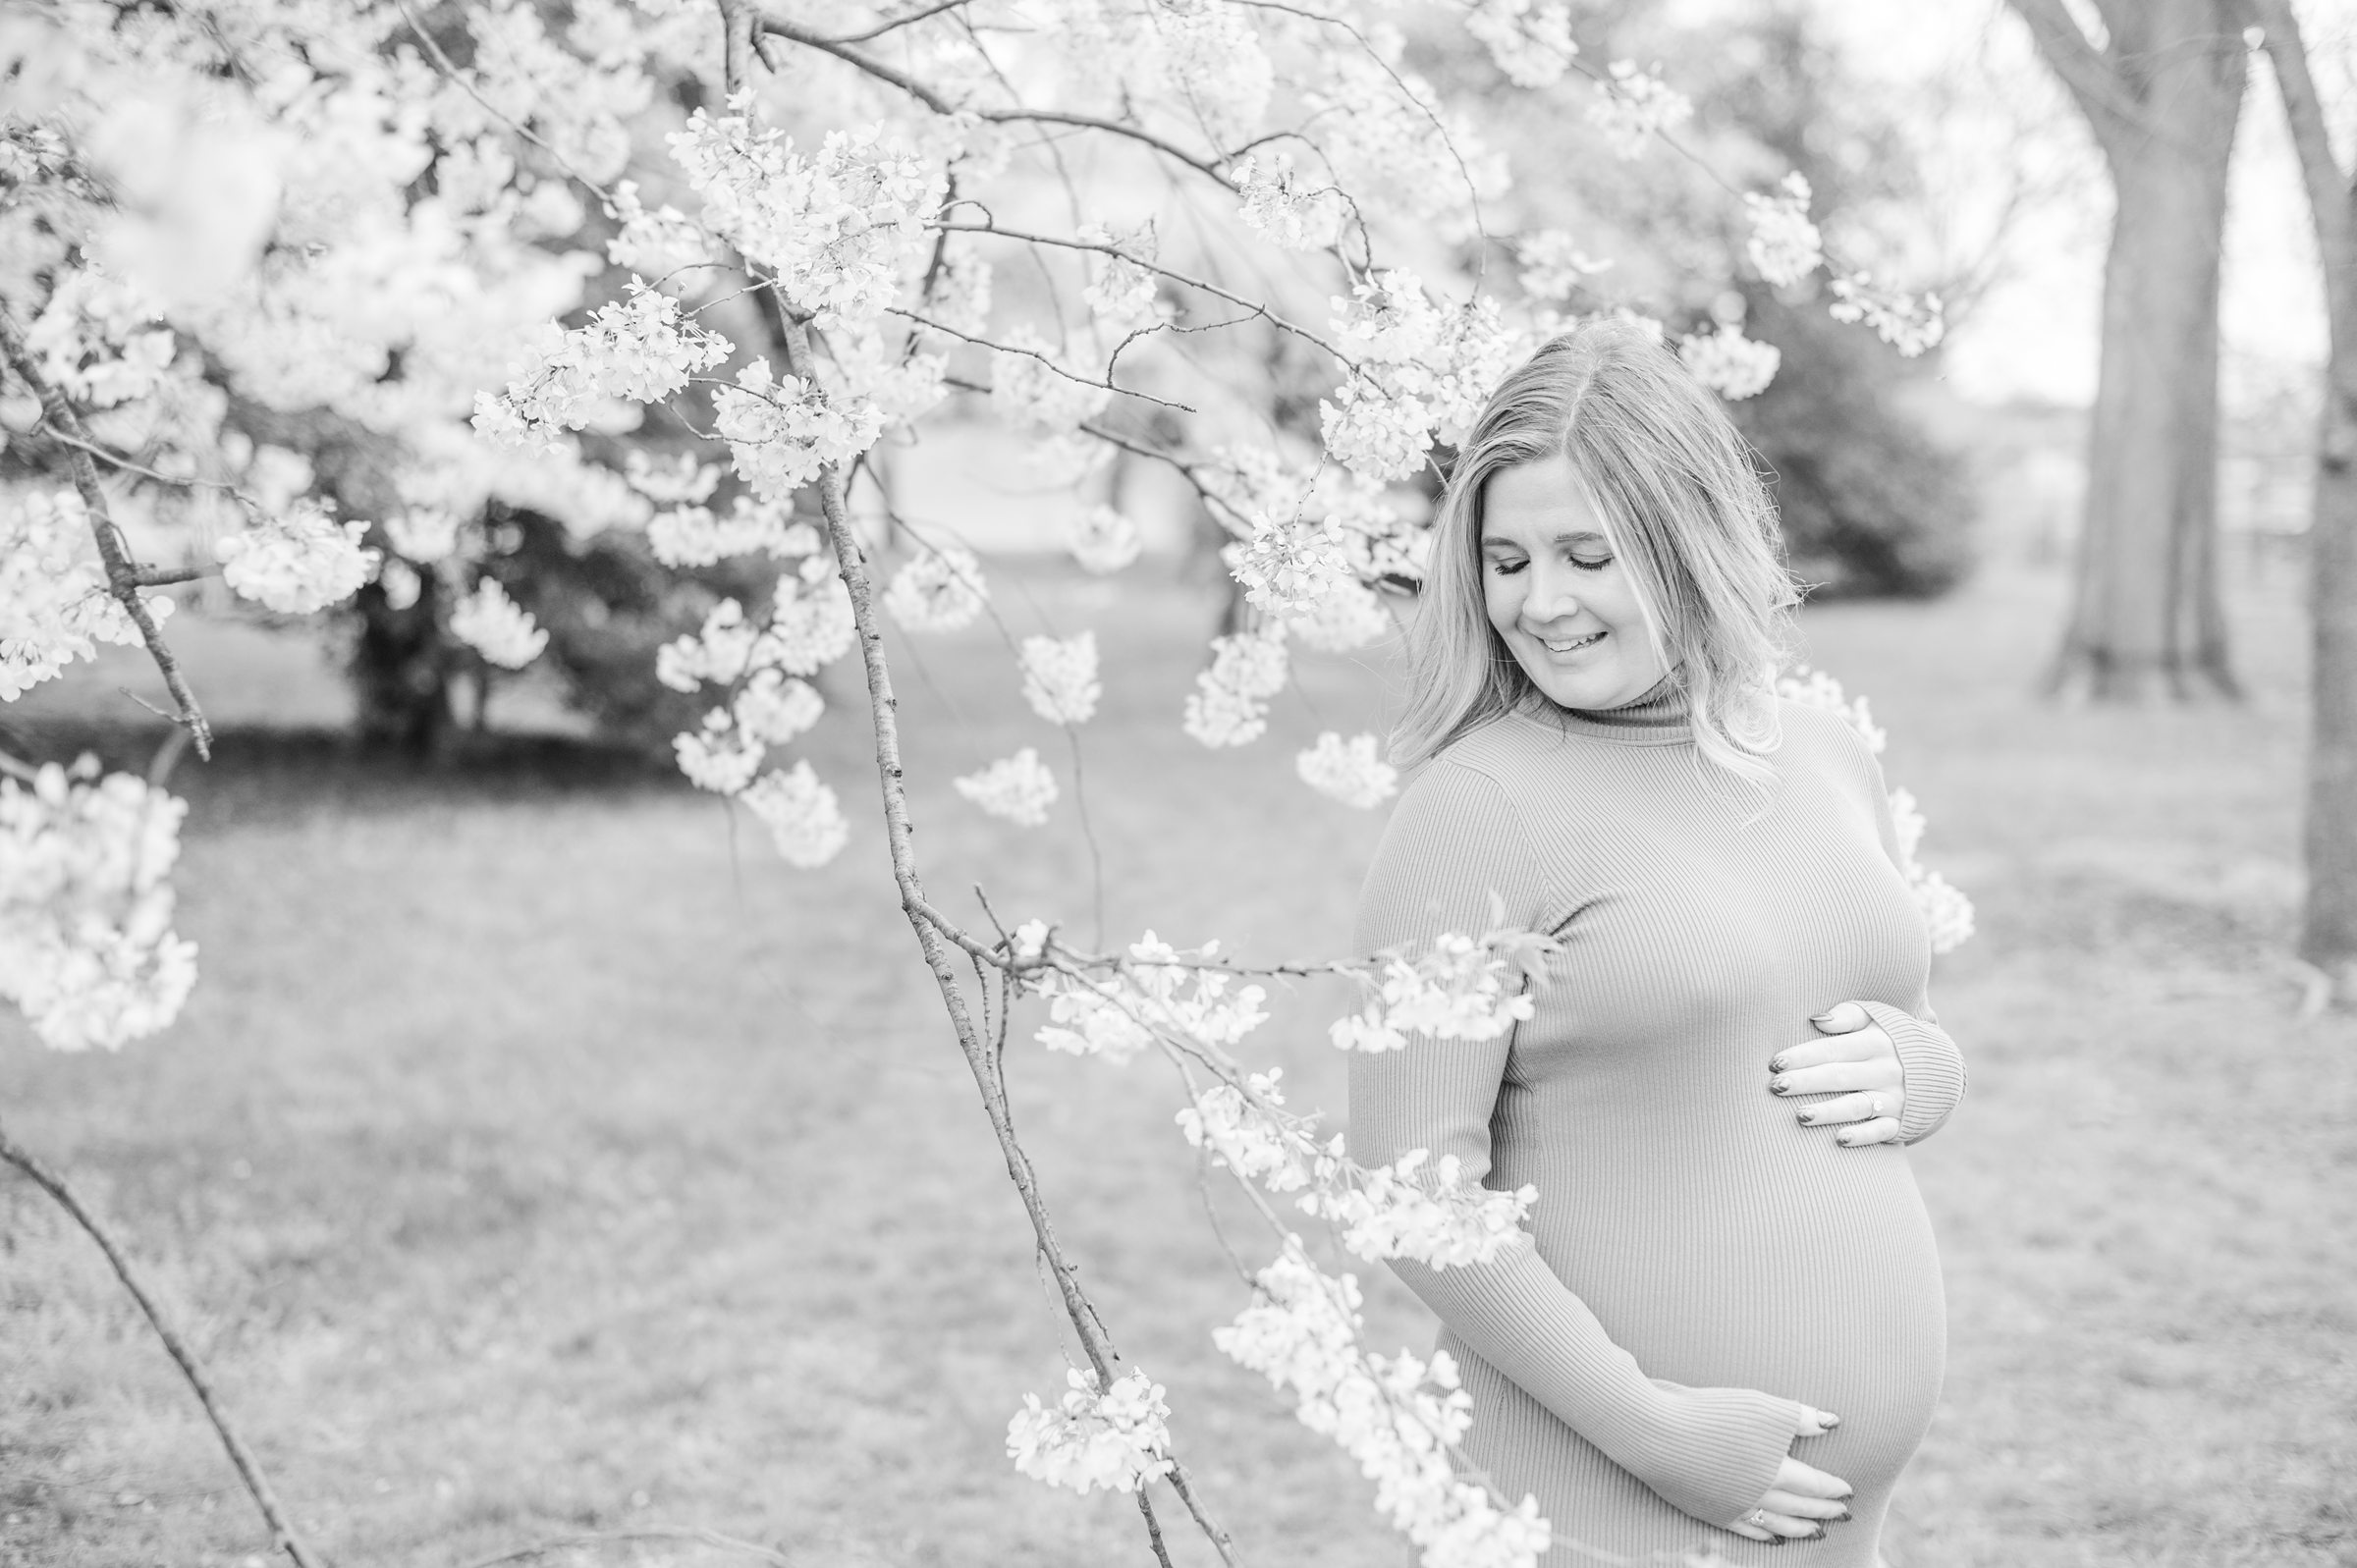 Mama-to-be poses with her bump amongst the cherry blossoms at the Washington, DC Tidal Basin during a maternity session photographed by Cait Kramer Photography